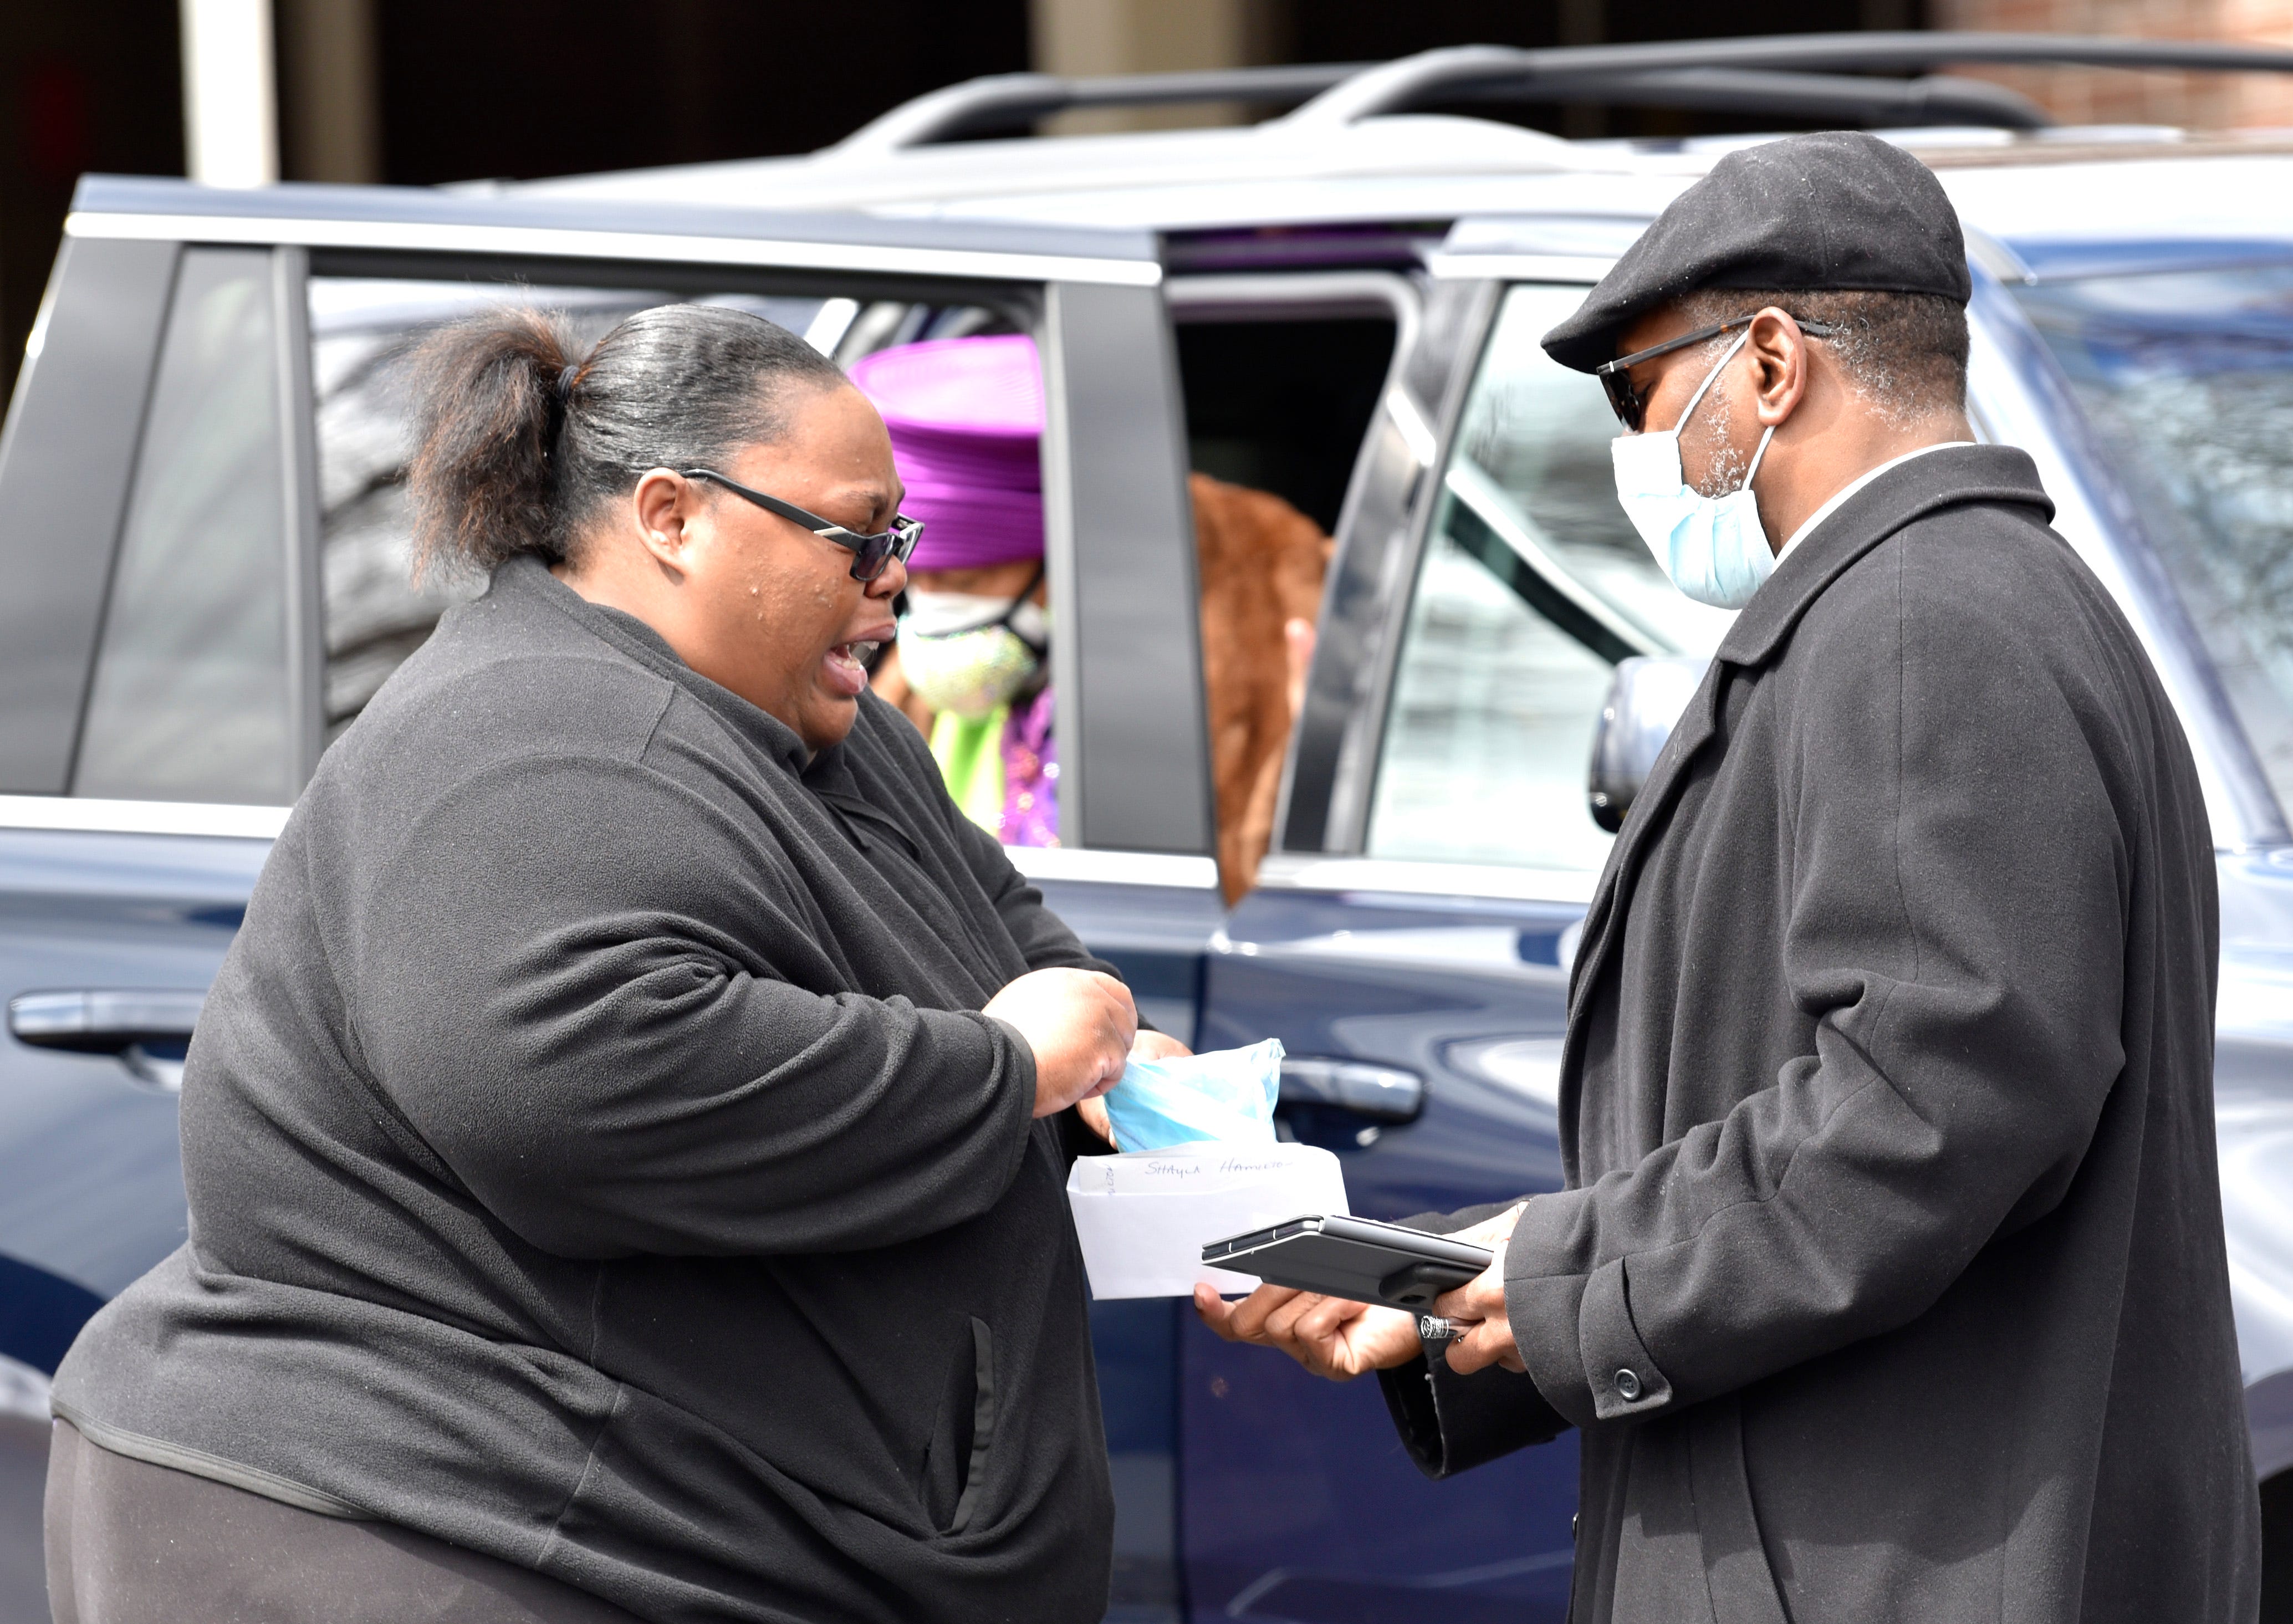 Shayla Hamilton, left, of Grand Blanc, wails as Jackson Memorial Temple Church of God in Christ Pastor Kiemba Knowlin hands her a face mask before she enters the funeral home. She is niece to Brown Jr. and cousin of Brown III.